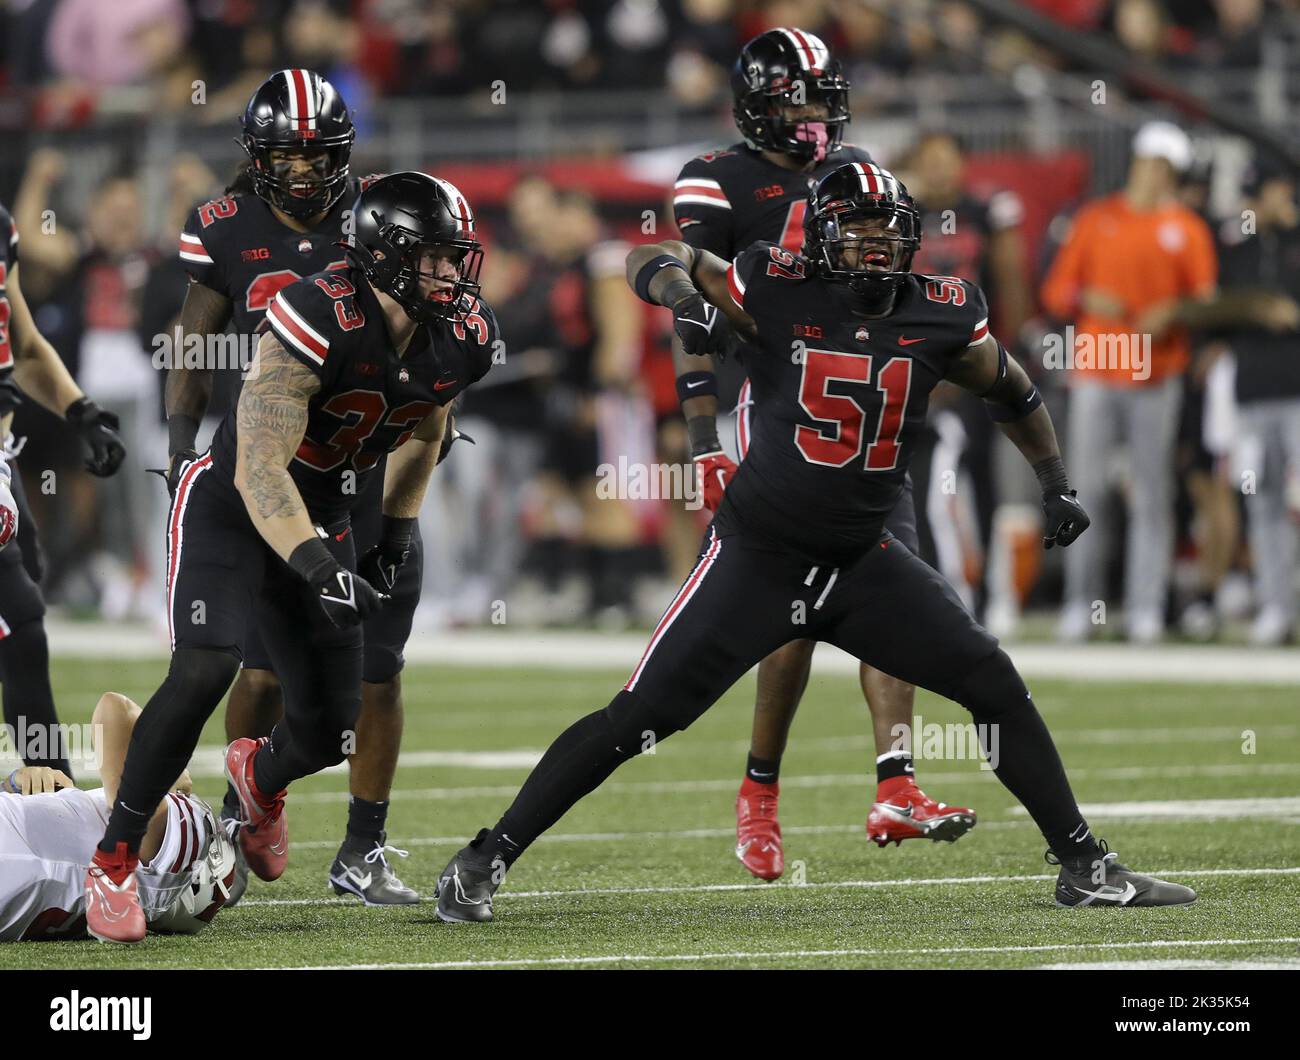 Columbus, United States. 24th Sep, 2022. The Ohio State Buckeyes Mike Hall Jr (51) and Jack Sawyer (33) celebrate a sack on Wisconsin Badgers Graham Mertz (5) in the first half in Columbus, Ohio on Saturday, September 24, 2022. Photo by Aaron Josefczyk/UPI Credit: UPI/Alamy Live News Stock Photo